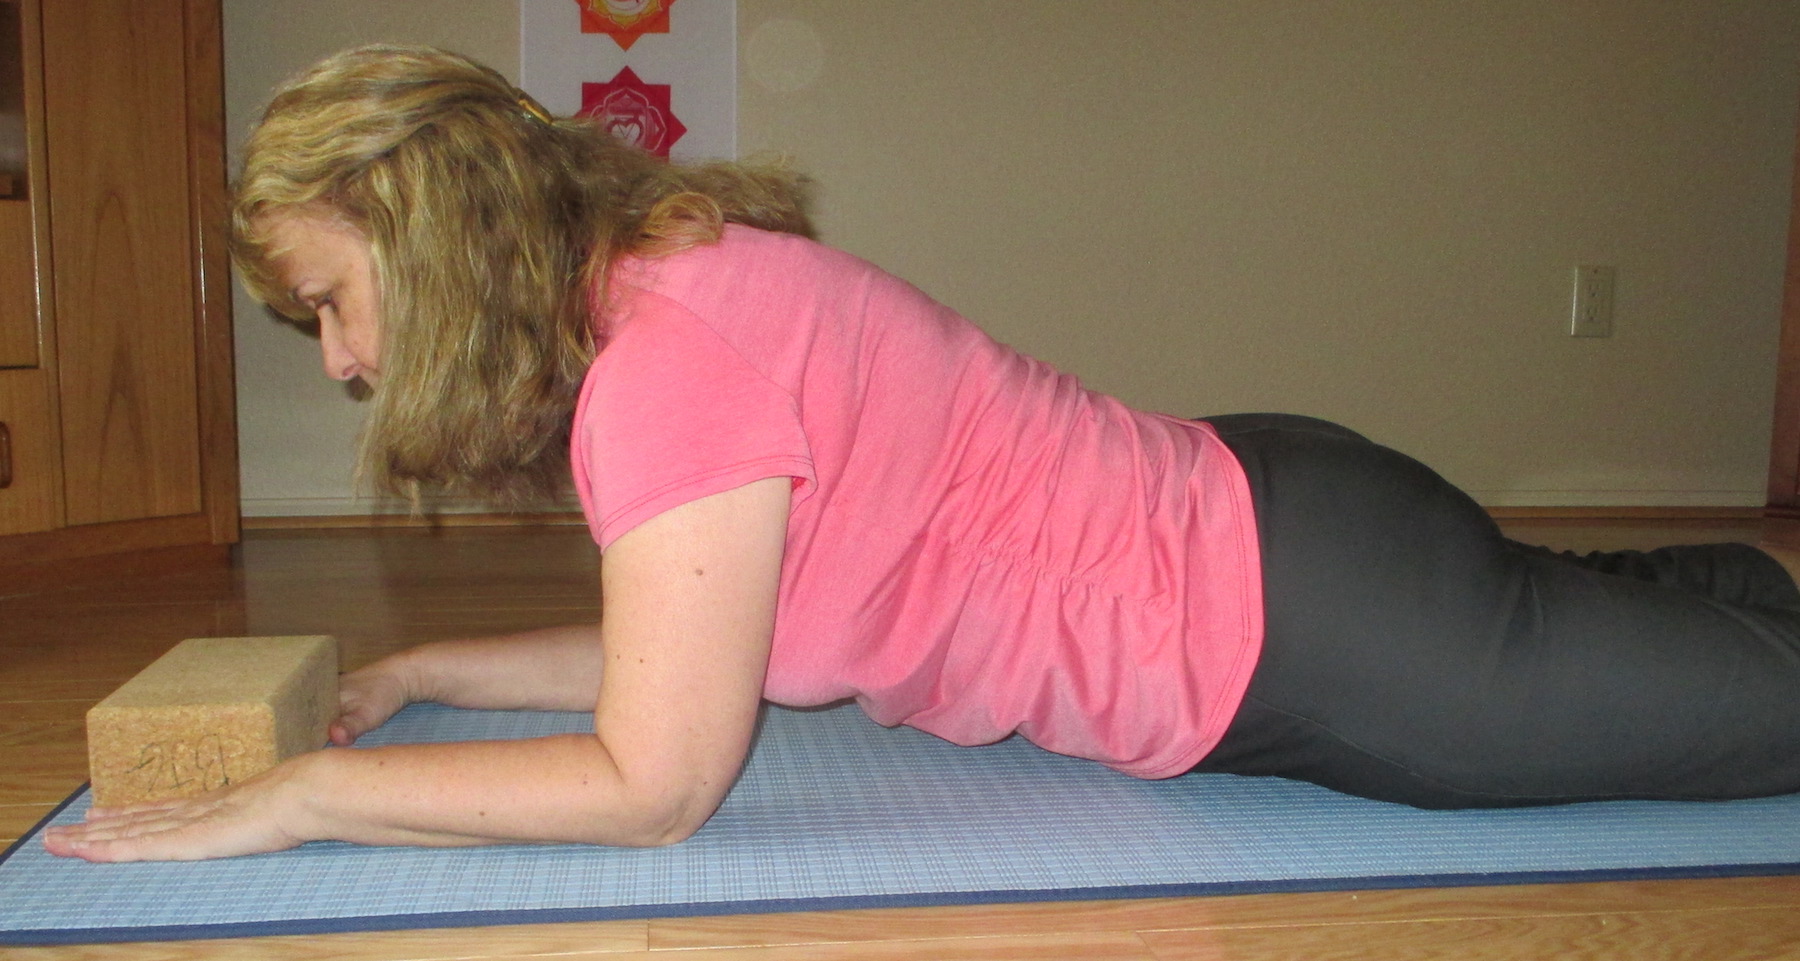 Yoga for Osteoporosis in the Spine